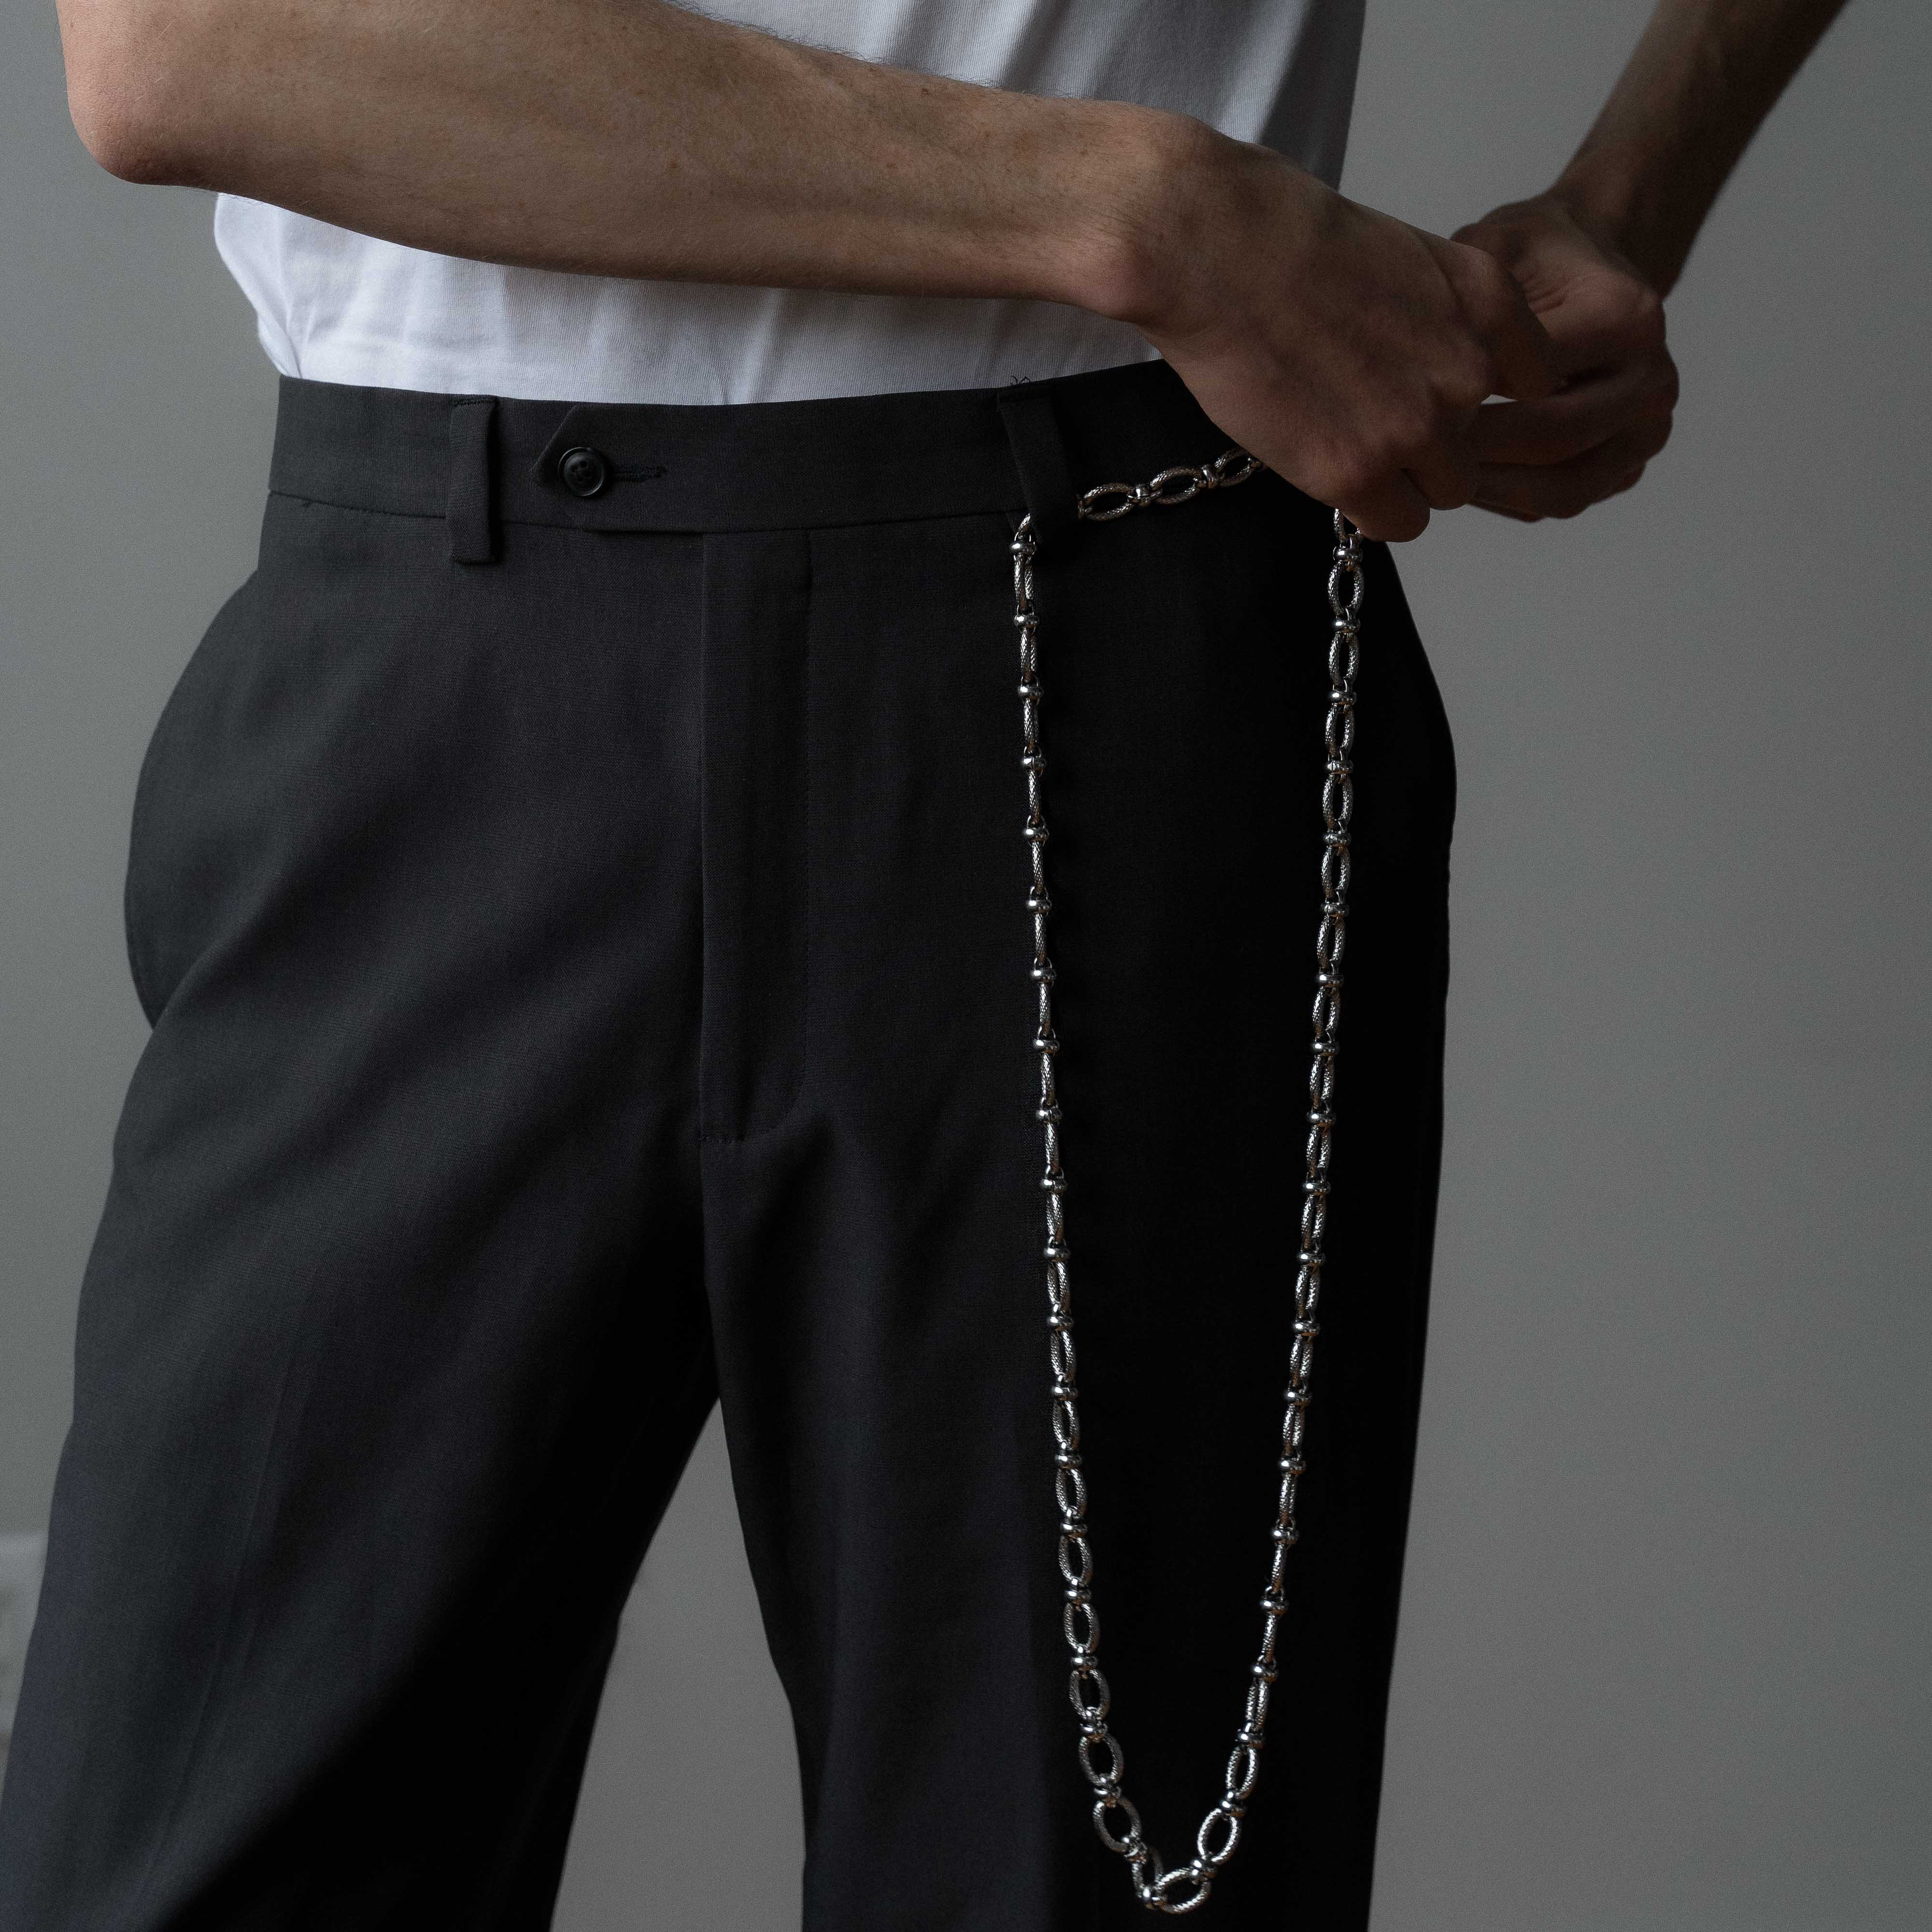  A photo of a man wearing a white t-shirt and black pants, stands in front of a mirror adjusting a silver chain belt at his waist. The belt has a modern, industrial design with a vintage touch.